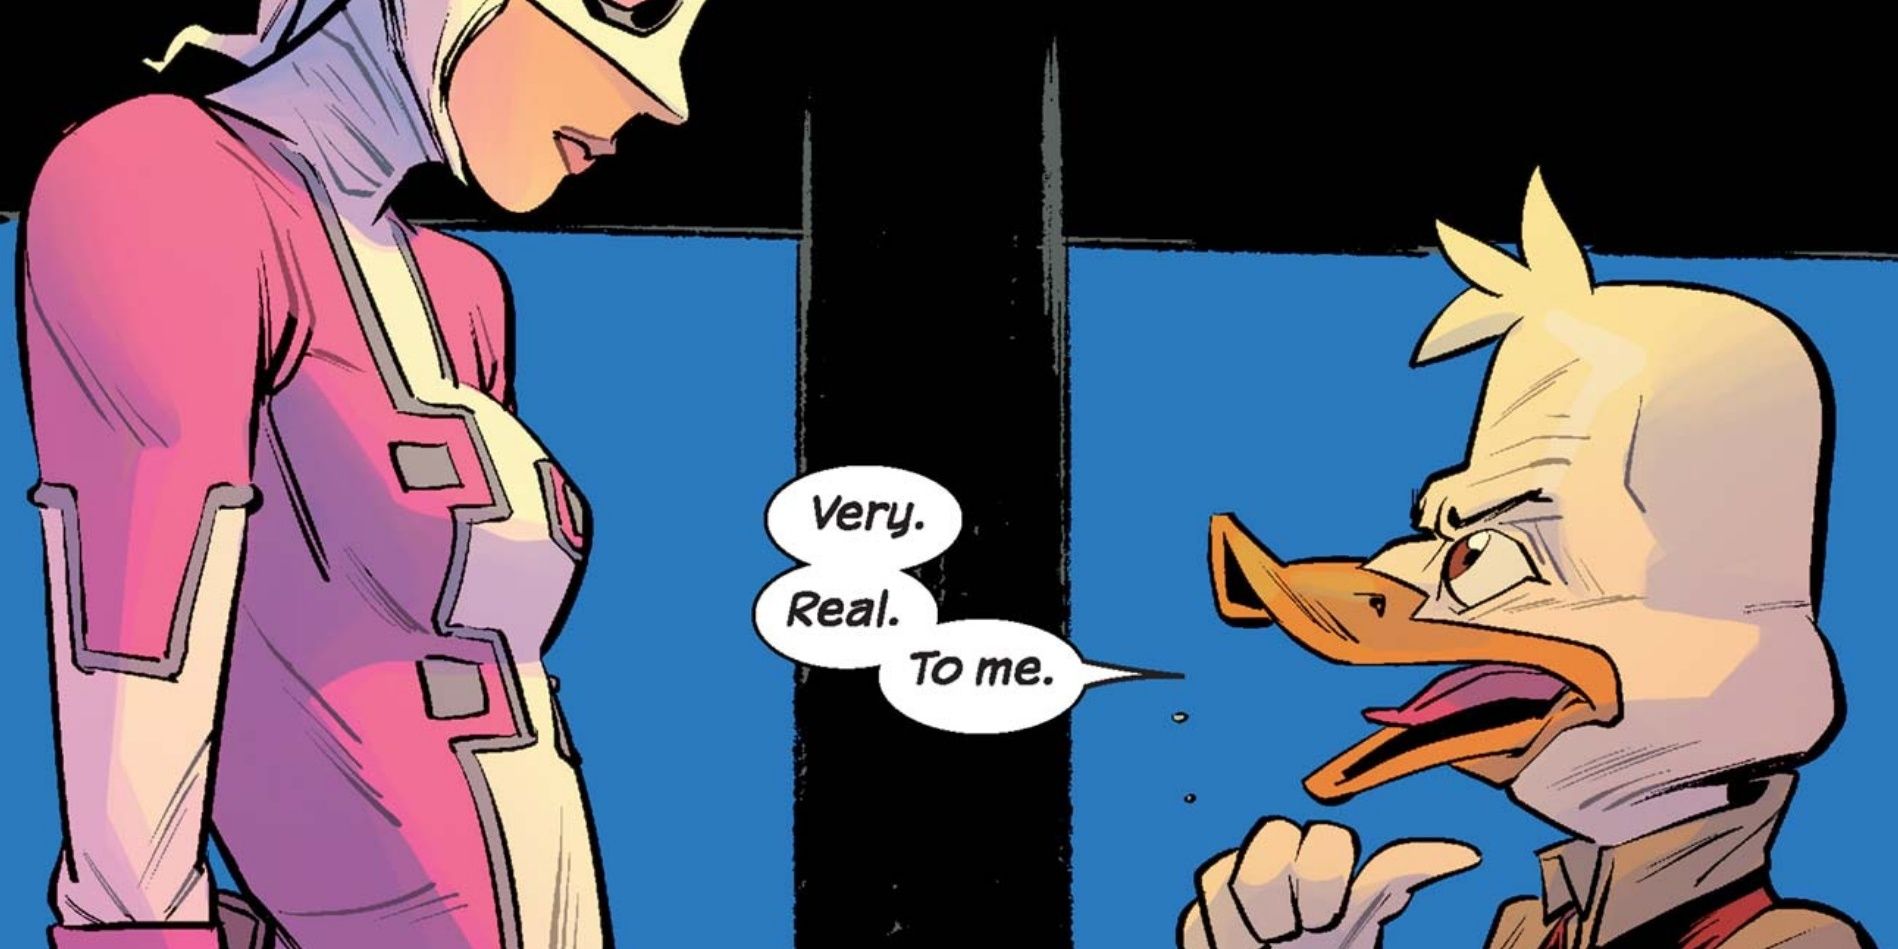 Howard the Duck tells Gwenpool things are very real